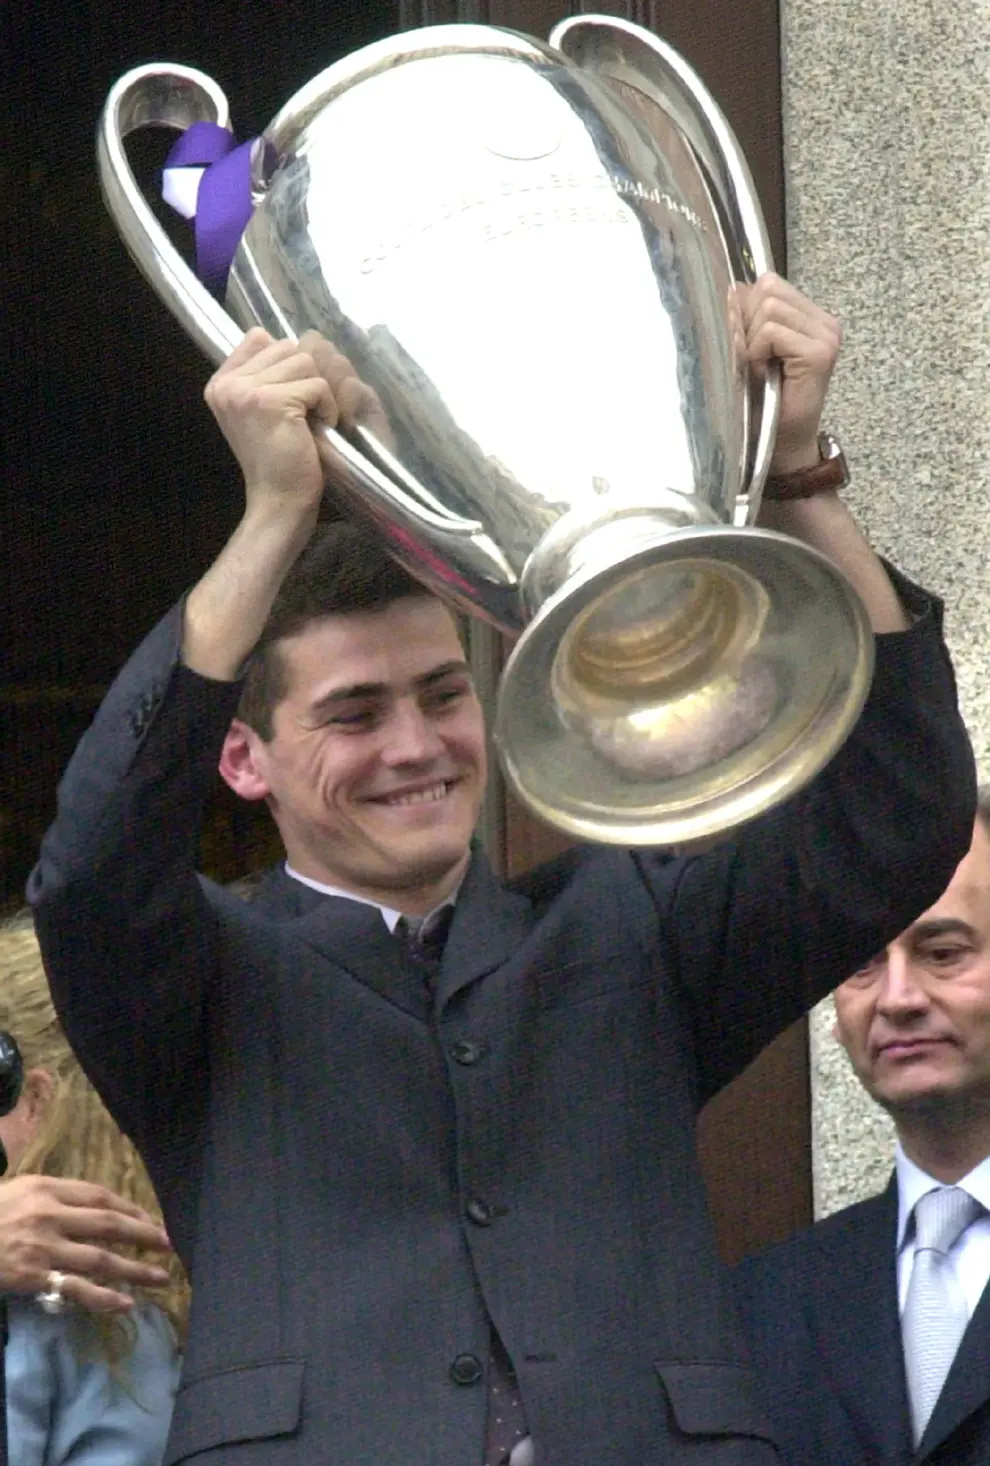 Departing Real Madrid captain and goalkeeper Iker Casillas waves to supporters at an official send-off at the Bernabeu stadium in Madrid, Spain, July 13, 2015.  Several hundred Real Madrid fans chanted for president Florentino Perez to resign at an official send-off for goalkeeper and captain Iker Casillas at the Bernabeu stadium on Monday. Real held the presentation following criticism over the surreal nature of Casillas's tearful news conference on Sunday, when he appeared to be alone in the stadium press room to read out a farewell statement. REUTERS/Andrea Comas SOCCER-SPAIN/CASILLAS